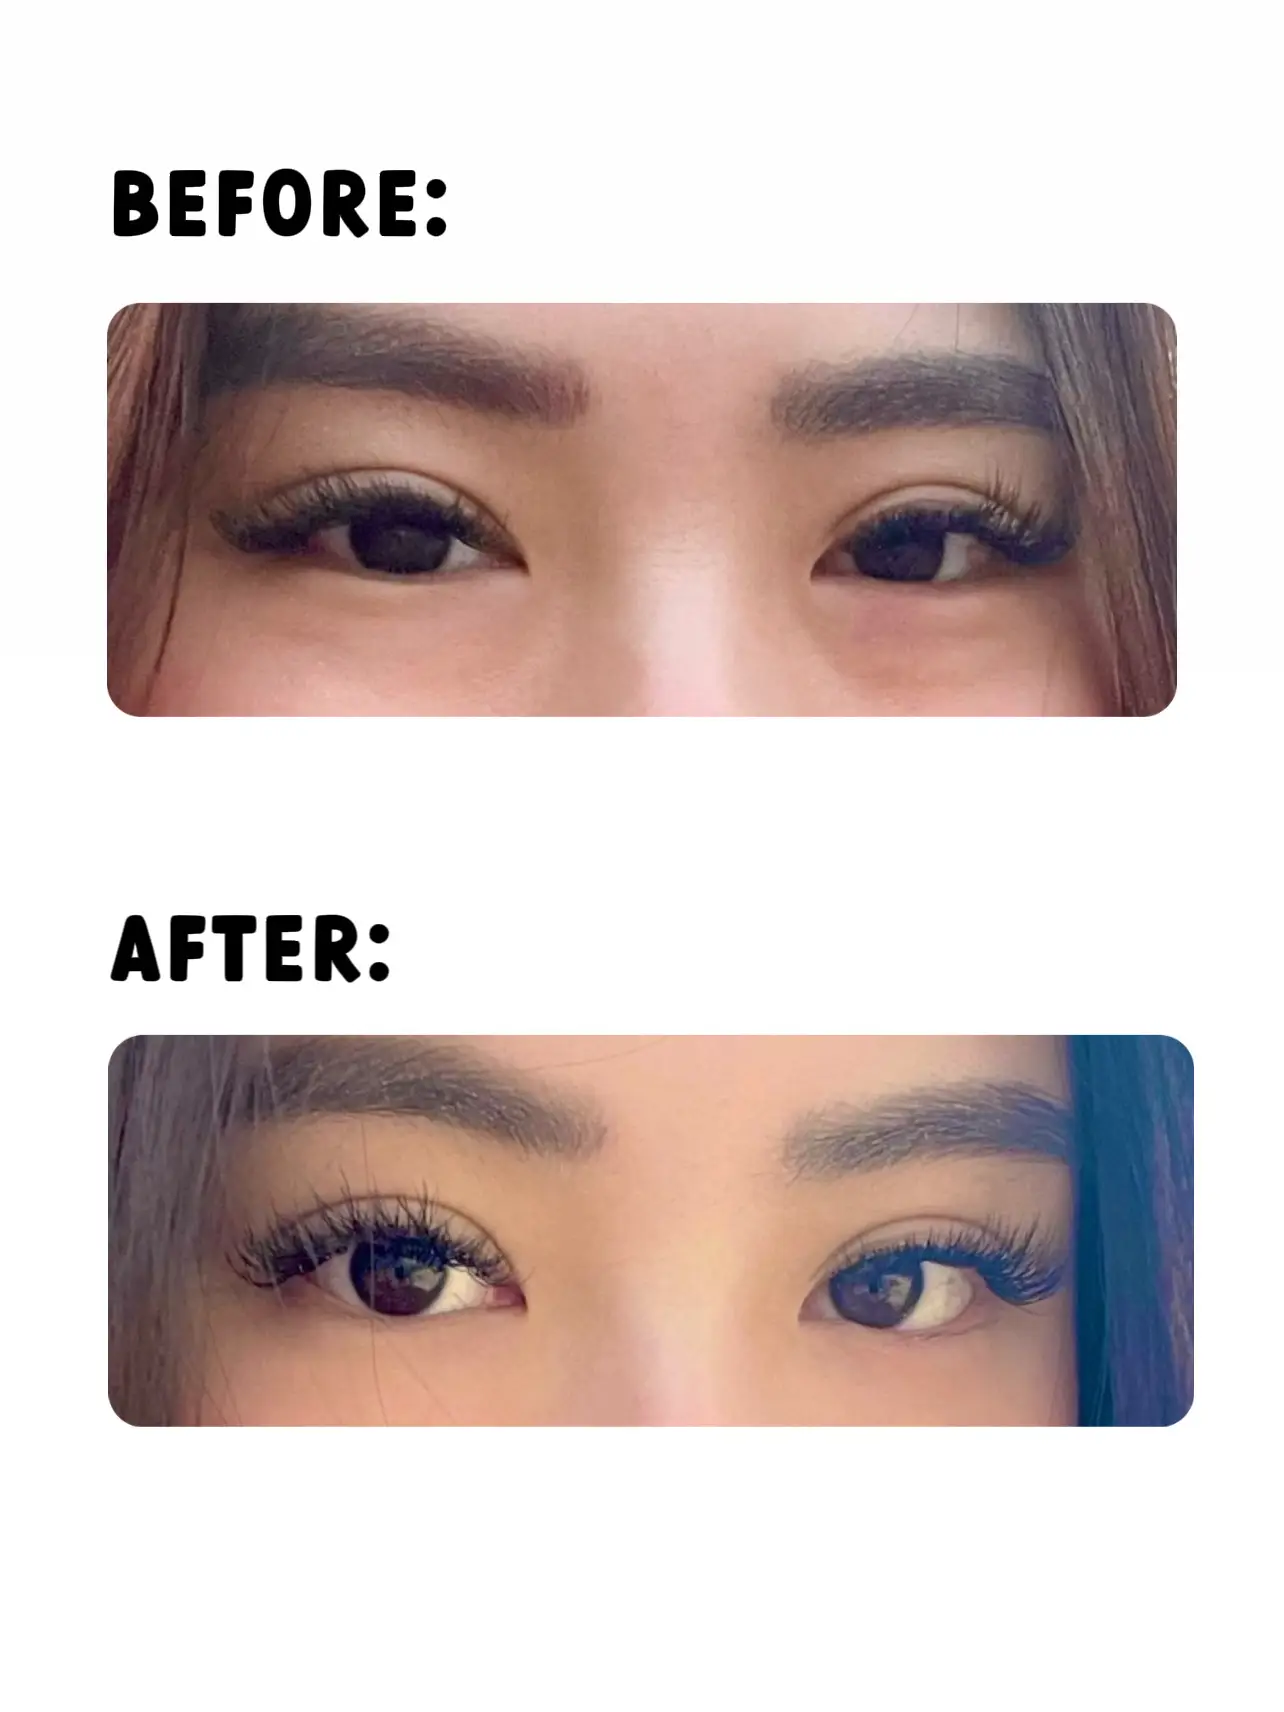 How I got rid of my EYE BAGS FAST! 's images(1)